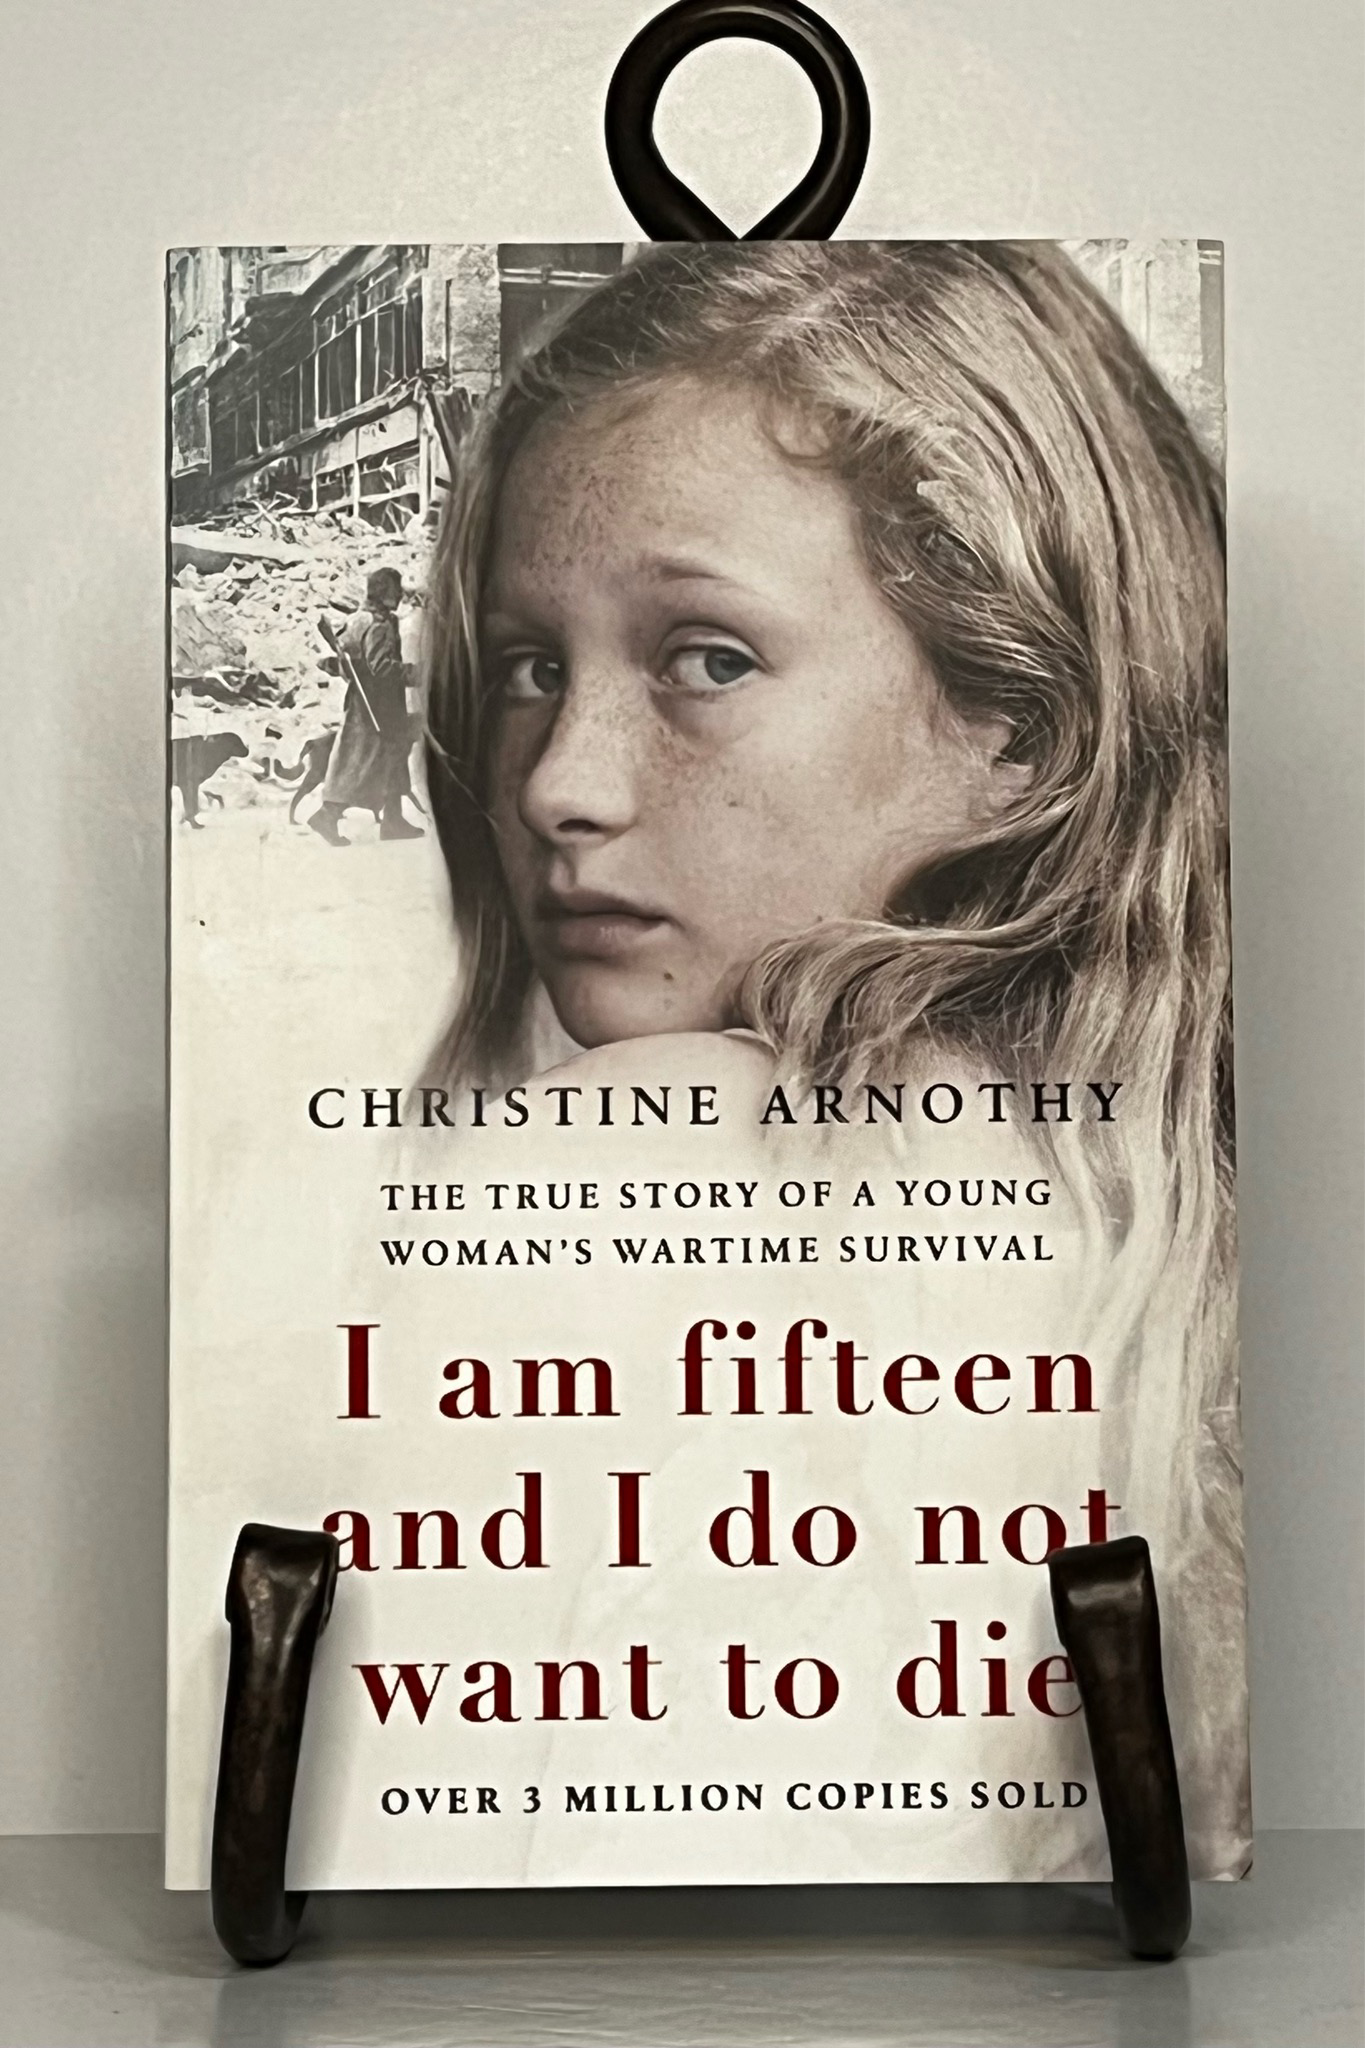 I Am Fifteen and I Do Not Want to Die: the True Story of a Young Woman's Wartime Survival